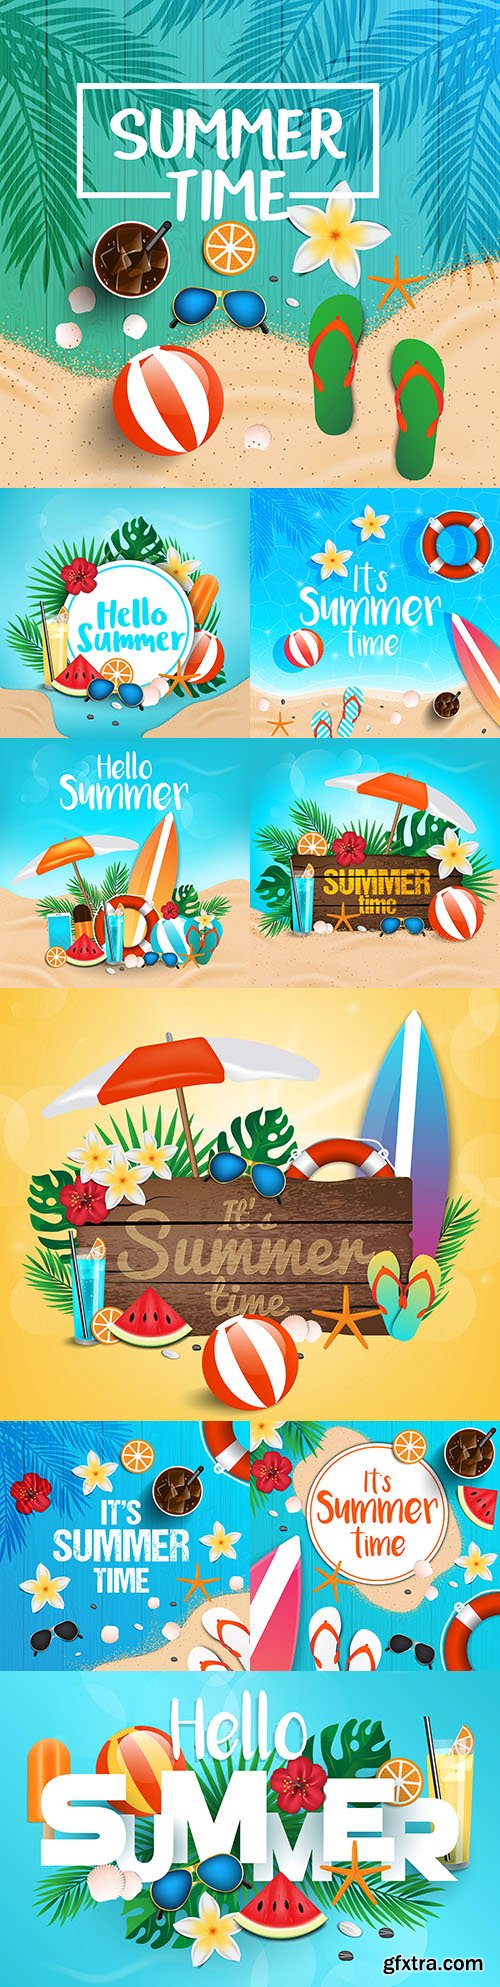 Hello summer holidays tropical background